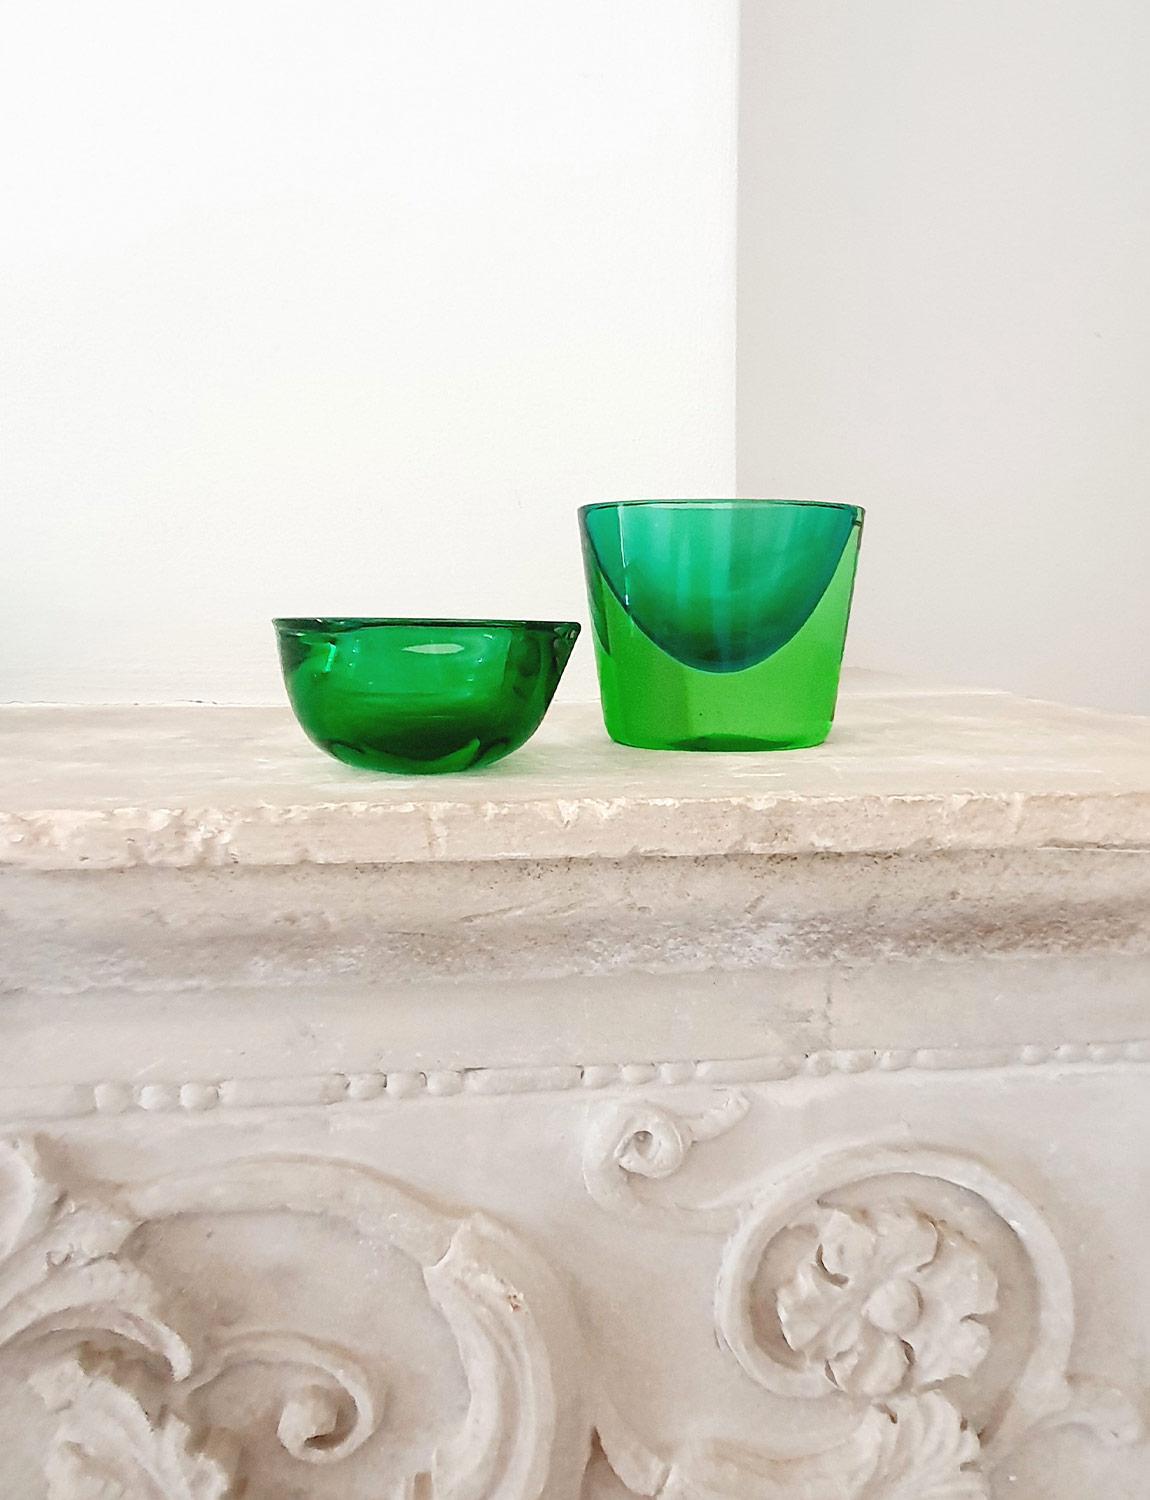 1960s Double Sommerso Flavio Poli Green Vase For Sale 1